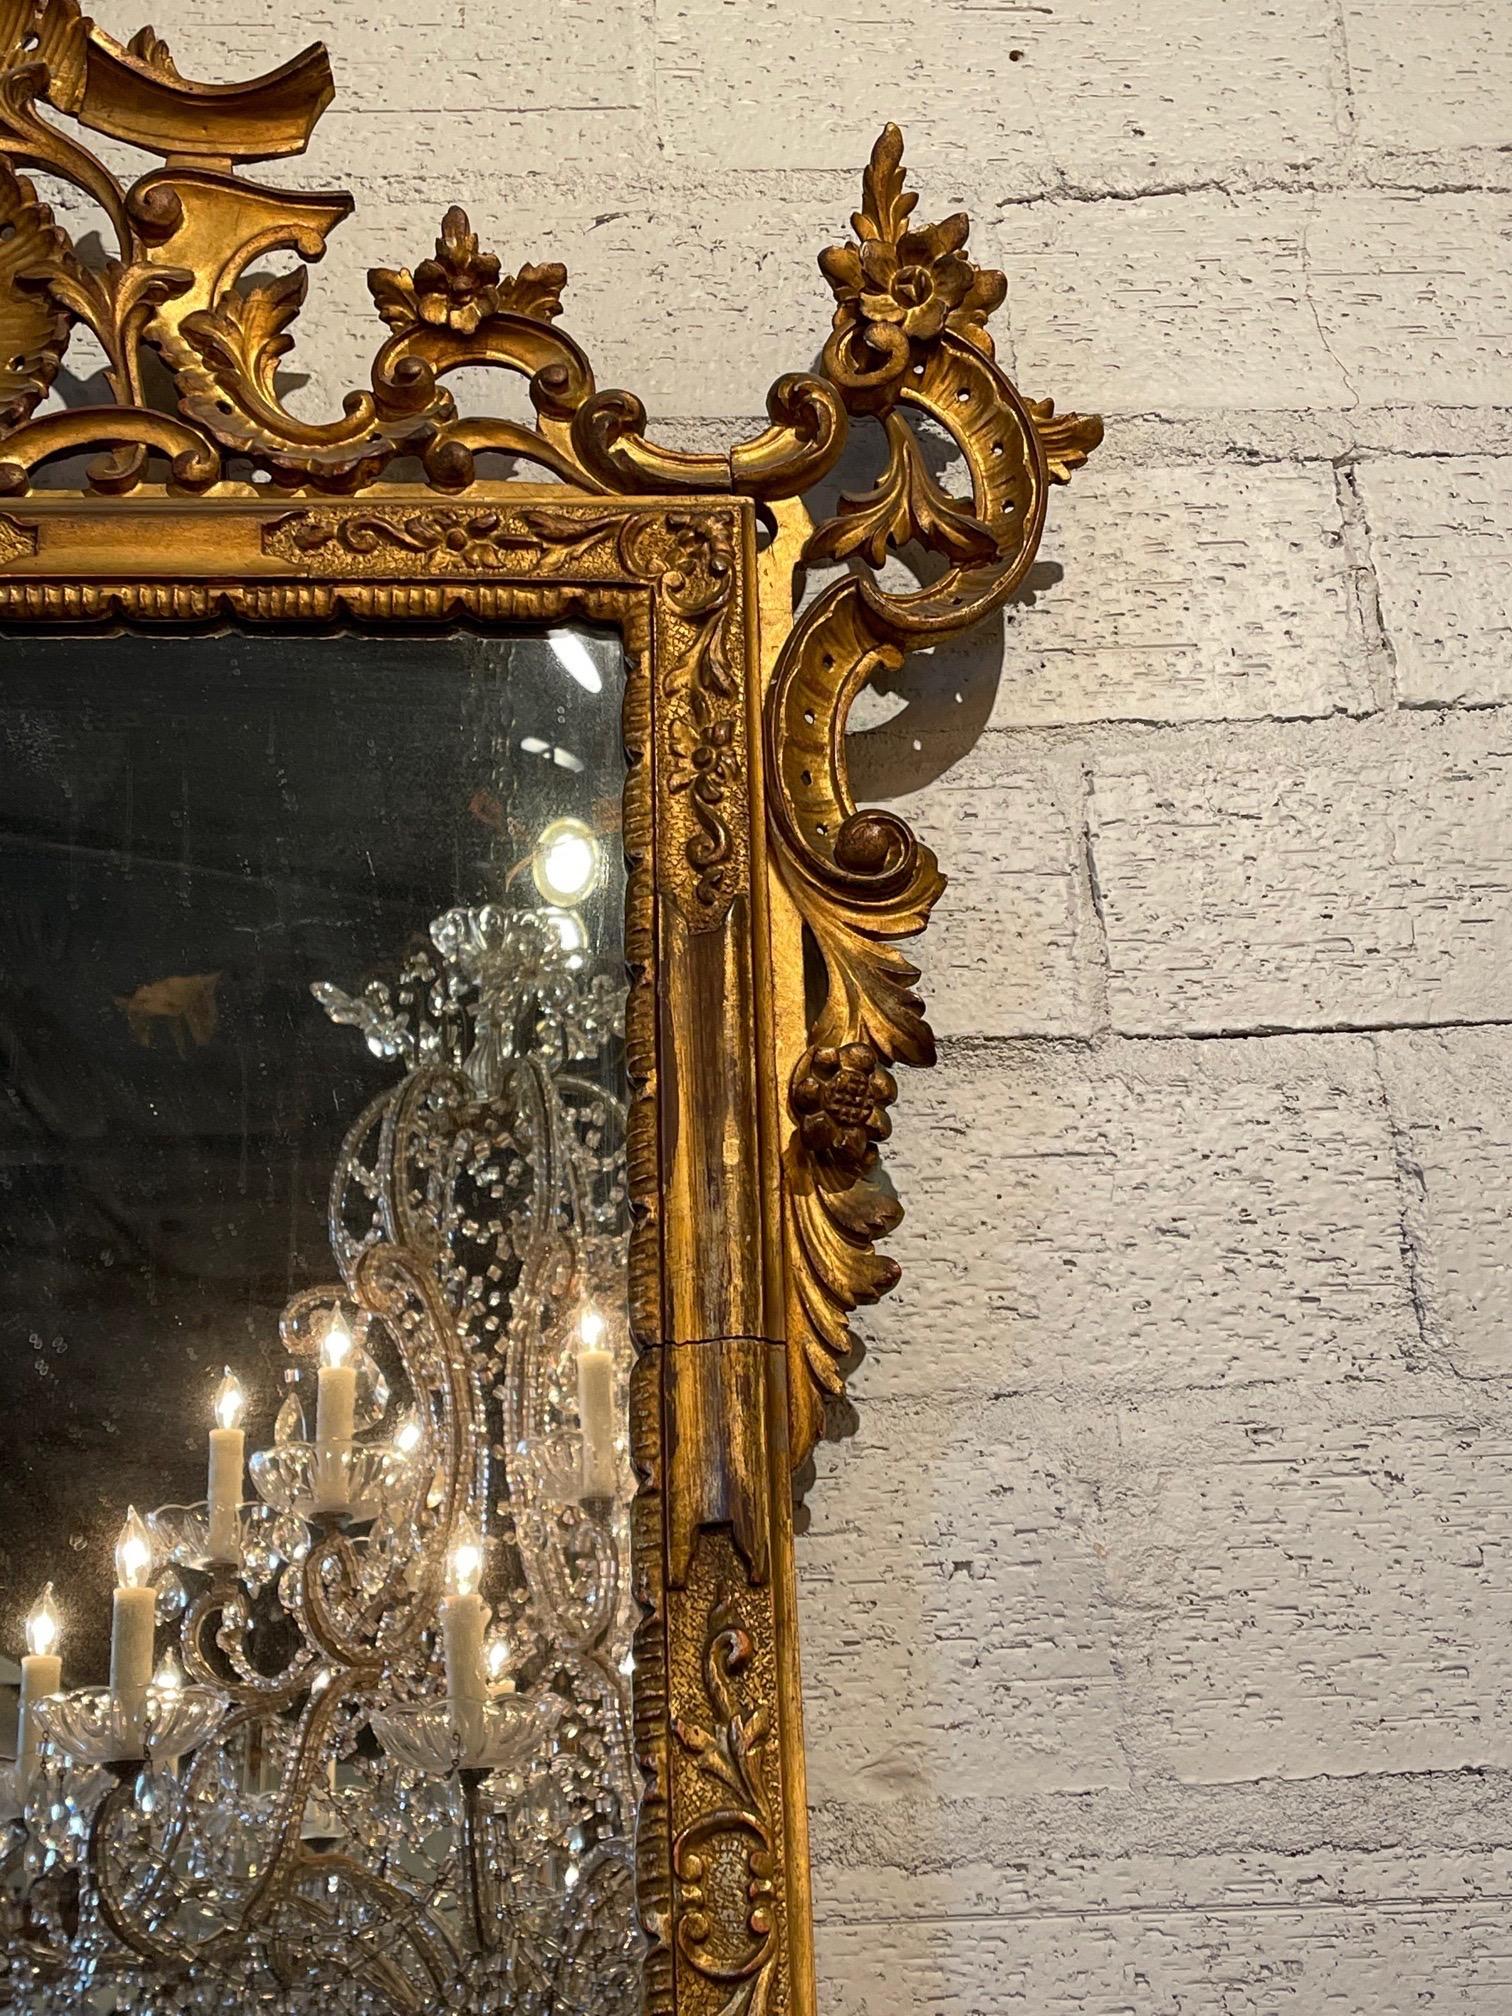 19th Century French Giltwood Mirror 1